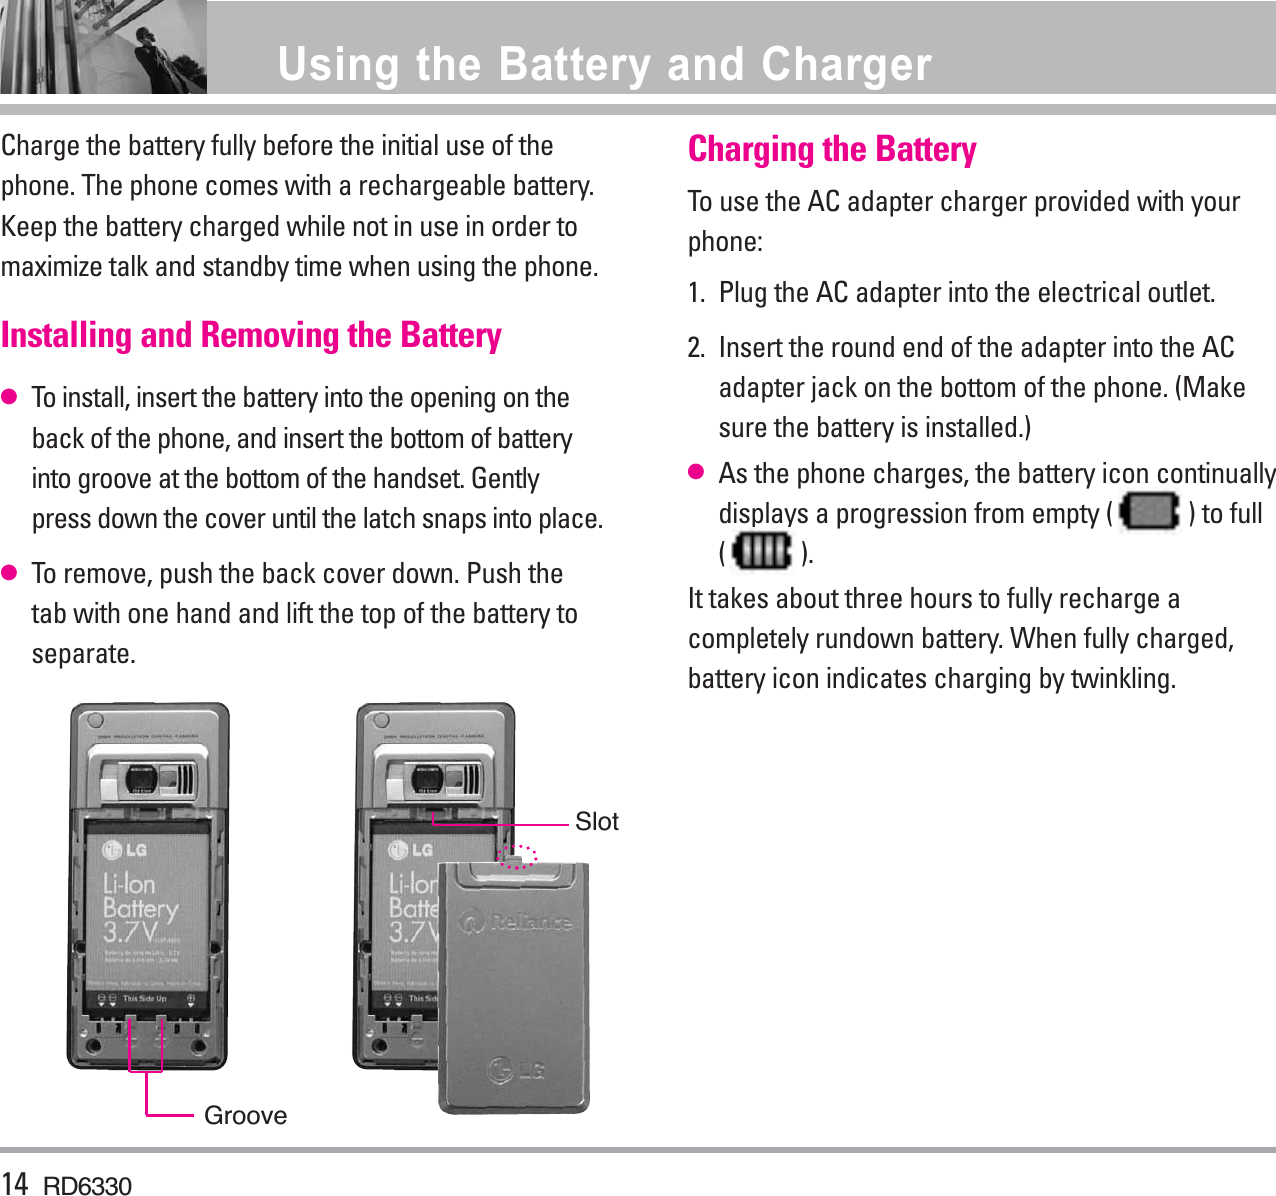 Charge the battery fully before the initial use of thephone. The phone comes with a rechargeable battery.Keep the battery charged while not in use in order tomaximize talk and standby time when using the phone.Installing and Removing the Battery●To install, insert the battery into the opening on theback of the phone, and insert the bottom of batteryinto groove at the bottom of the handset. Gentlypress down the cover until the latch snaps into place.●To remove, push the back cover down. Push thetab with one hand and lift the top of the battery toseparate.Charging the BatteryTo use the AC adapter charger provided with yourphone:1.  Plug the AC adapter into the electrical outlet.2.  Insert the round end of the adapter into the ACadapter jack on the bottom of the phone. (Makesure the battery is installed.)●As the phone charges, the battery icon continuallydisplays a progression from empty ( ) to full( ). It takes about three hours to fully recharge acompletely rundown battery. When fully charged,battery icon indicates charging by twinkling.14 RD6330Using the Battery and ChargerGrooveSlot